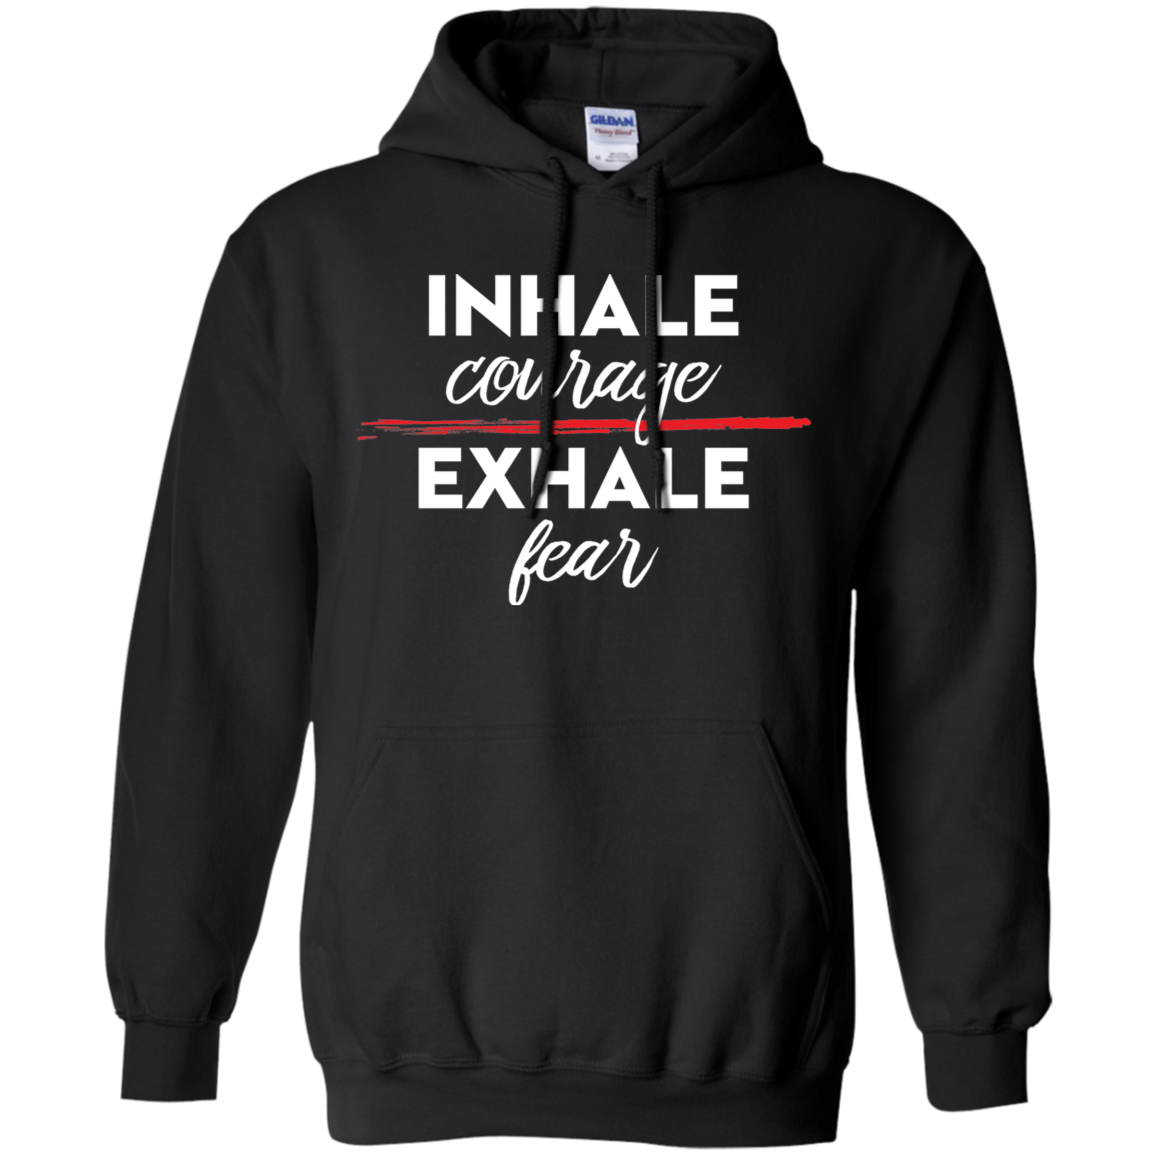 Inhale Courage Exhale Fear